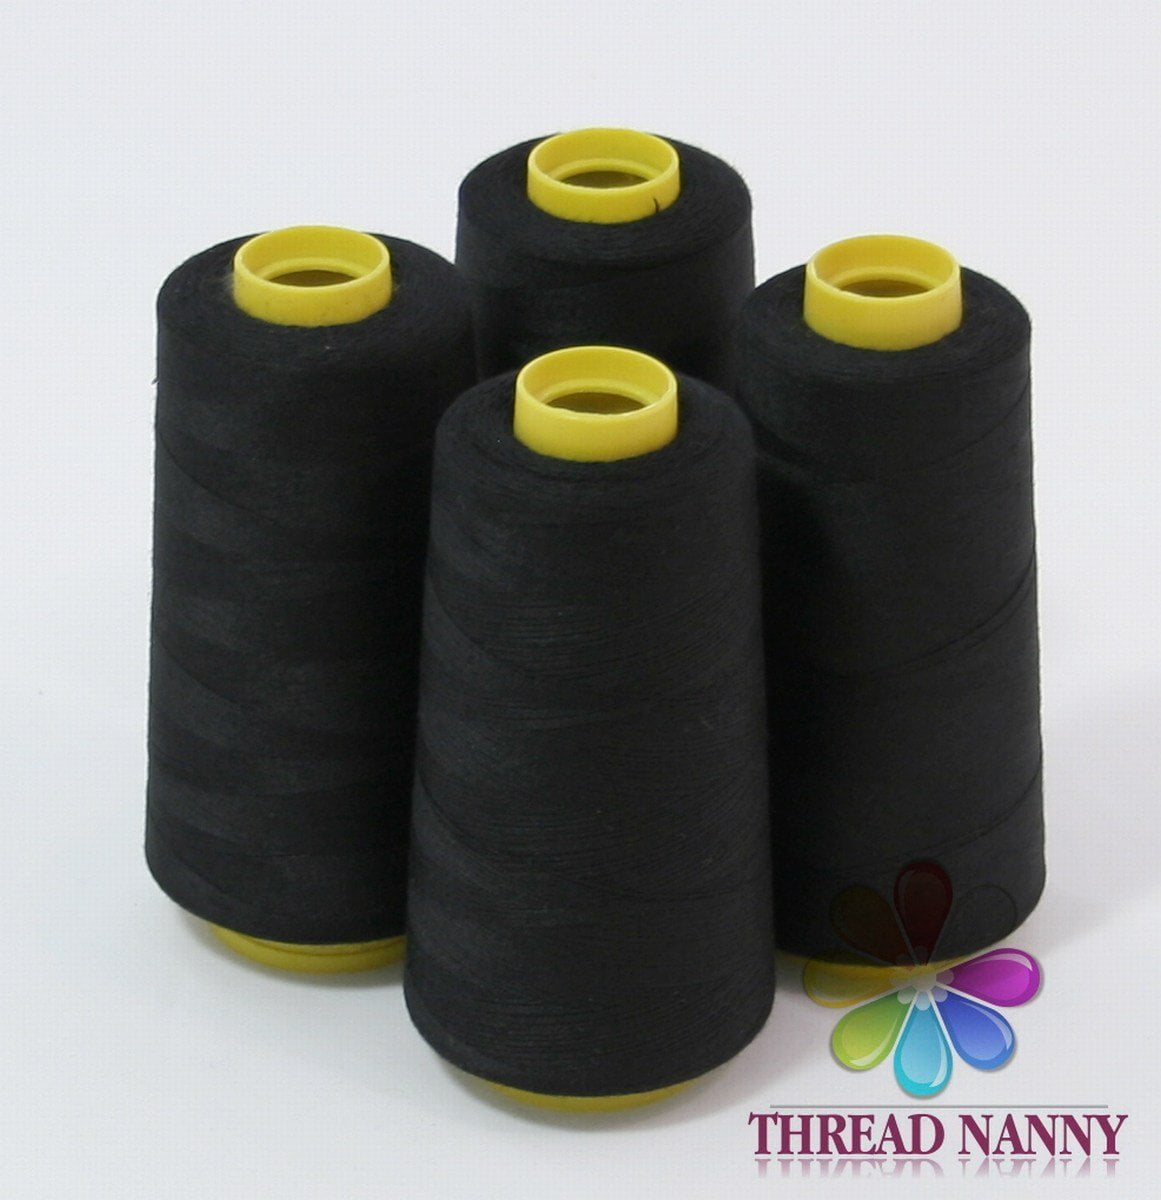 10 Black and White Spools of 3-PLY Polyester Sewing Quilting Serger Threads 